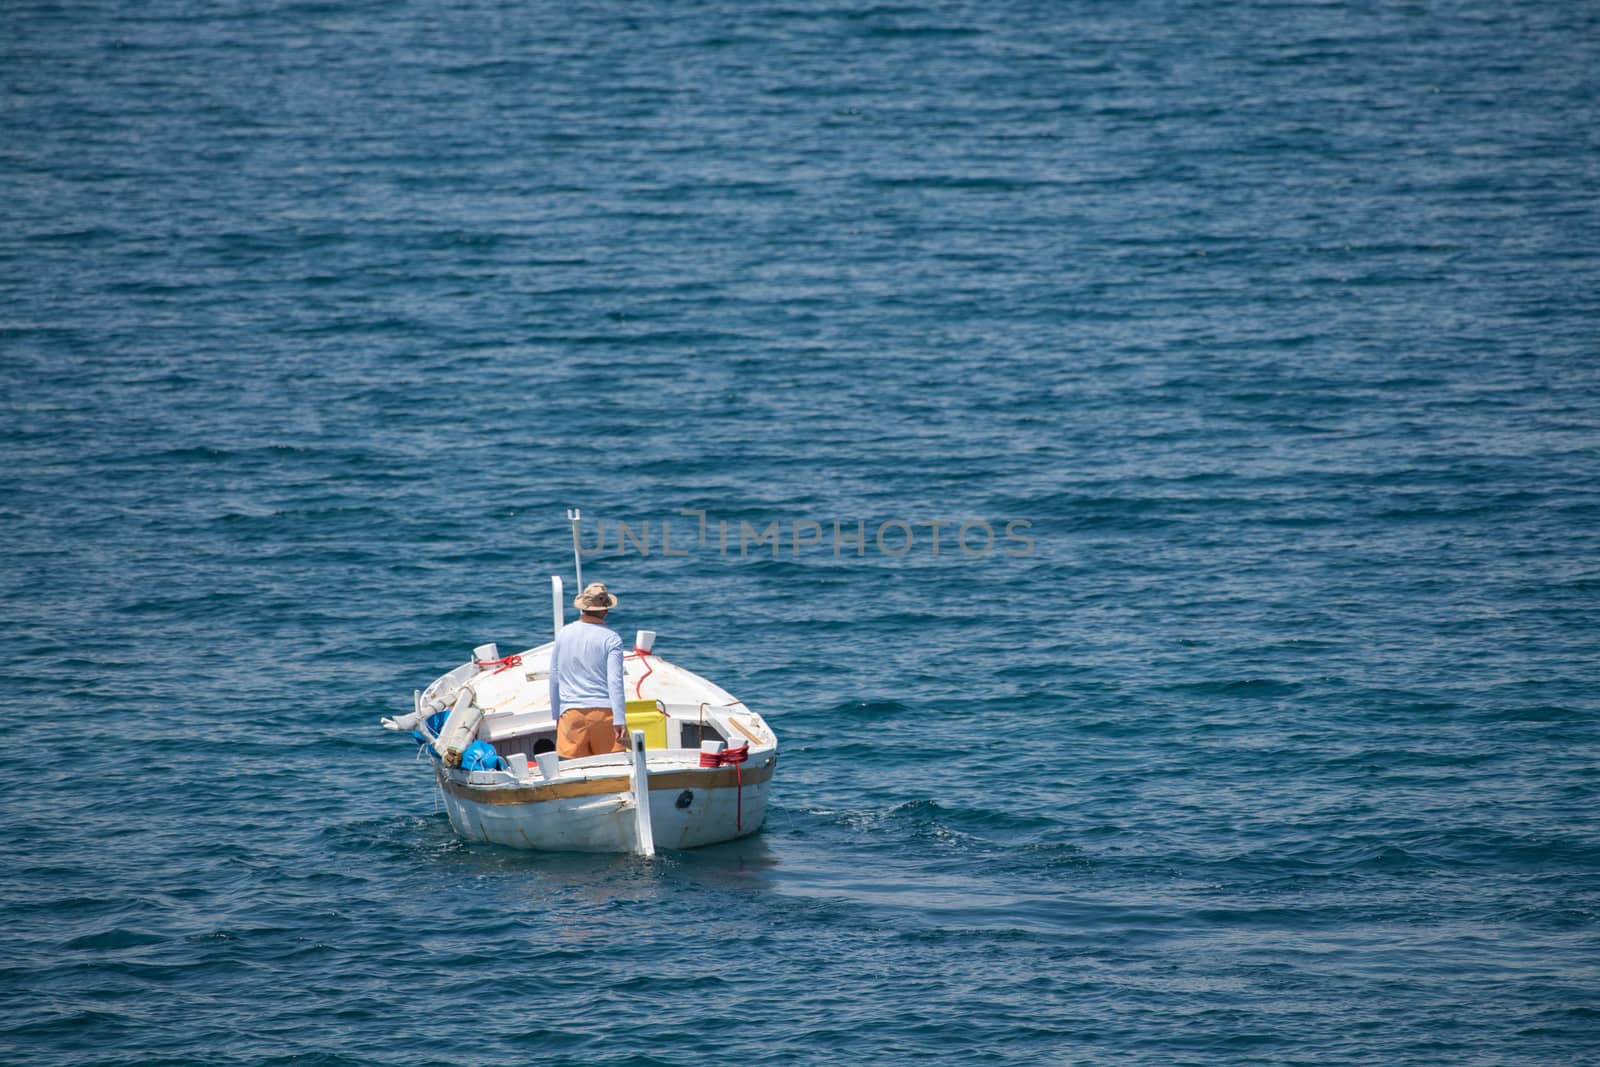 Fisherman in traditional wooden boat at sea by asafaric